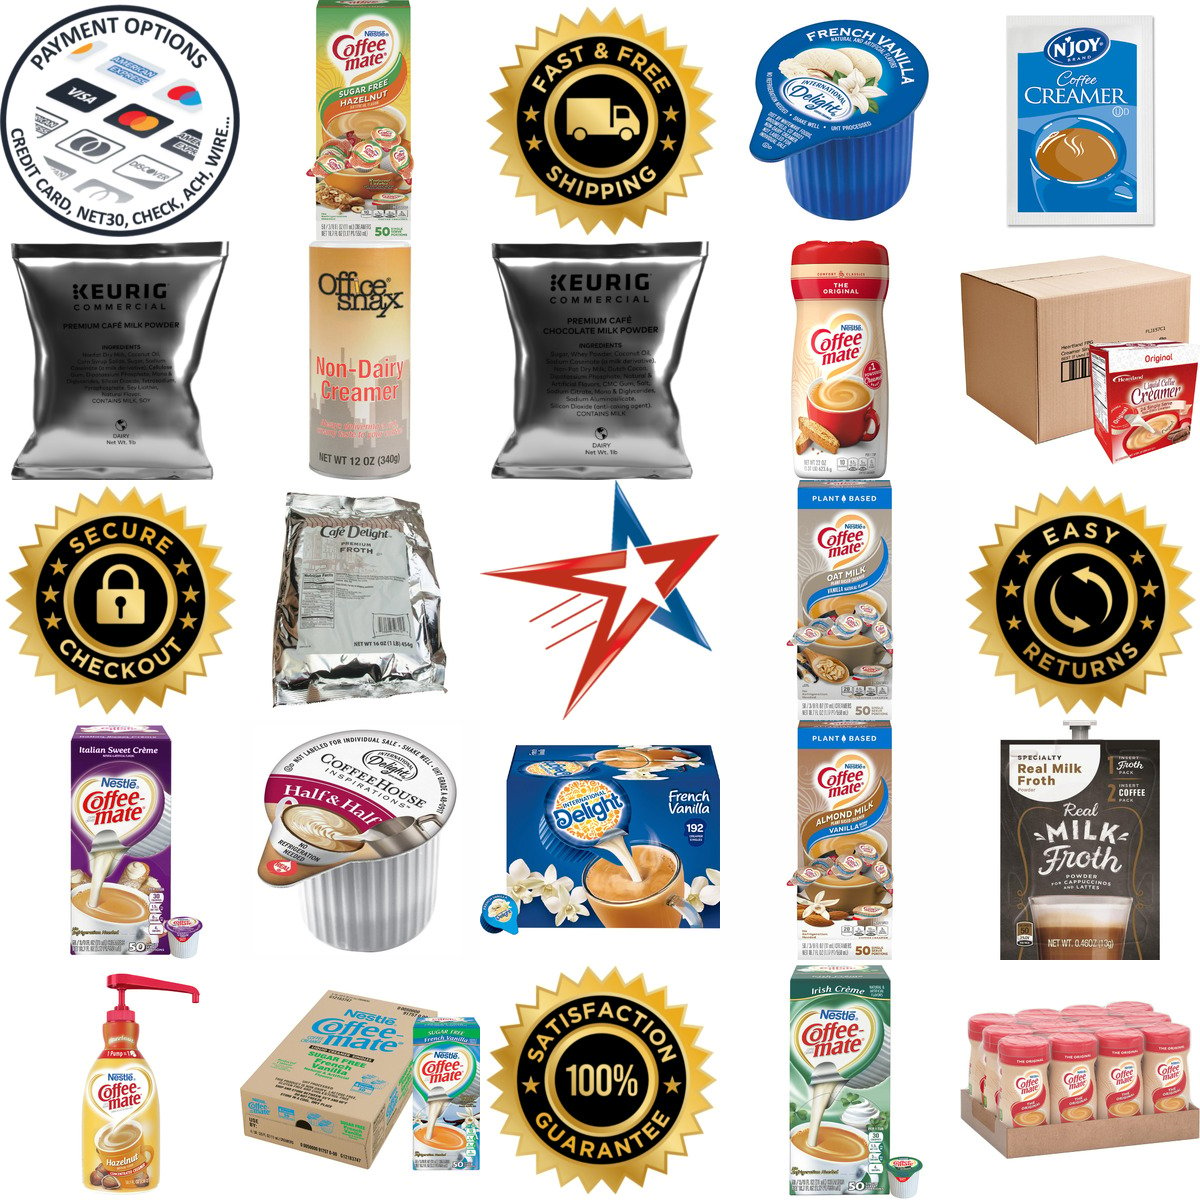 A selection of Creamers products on GoVets